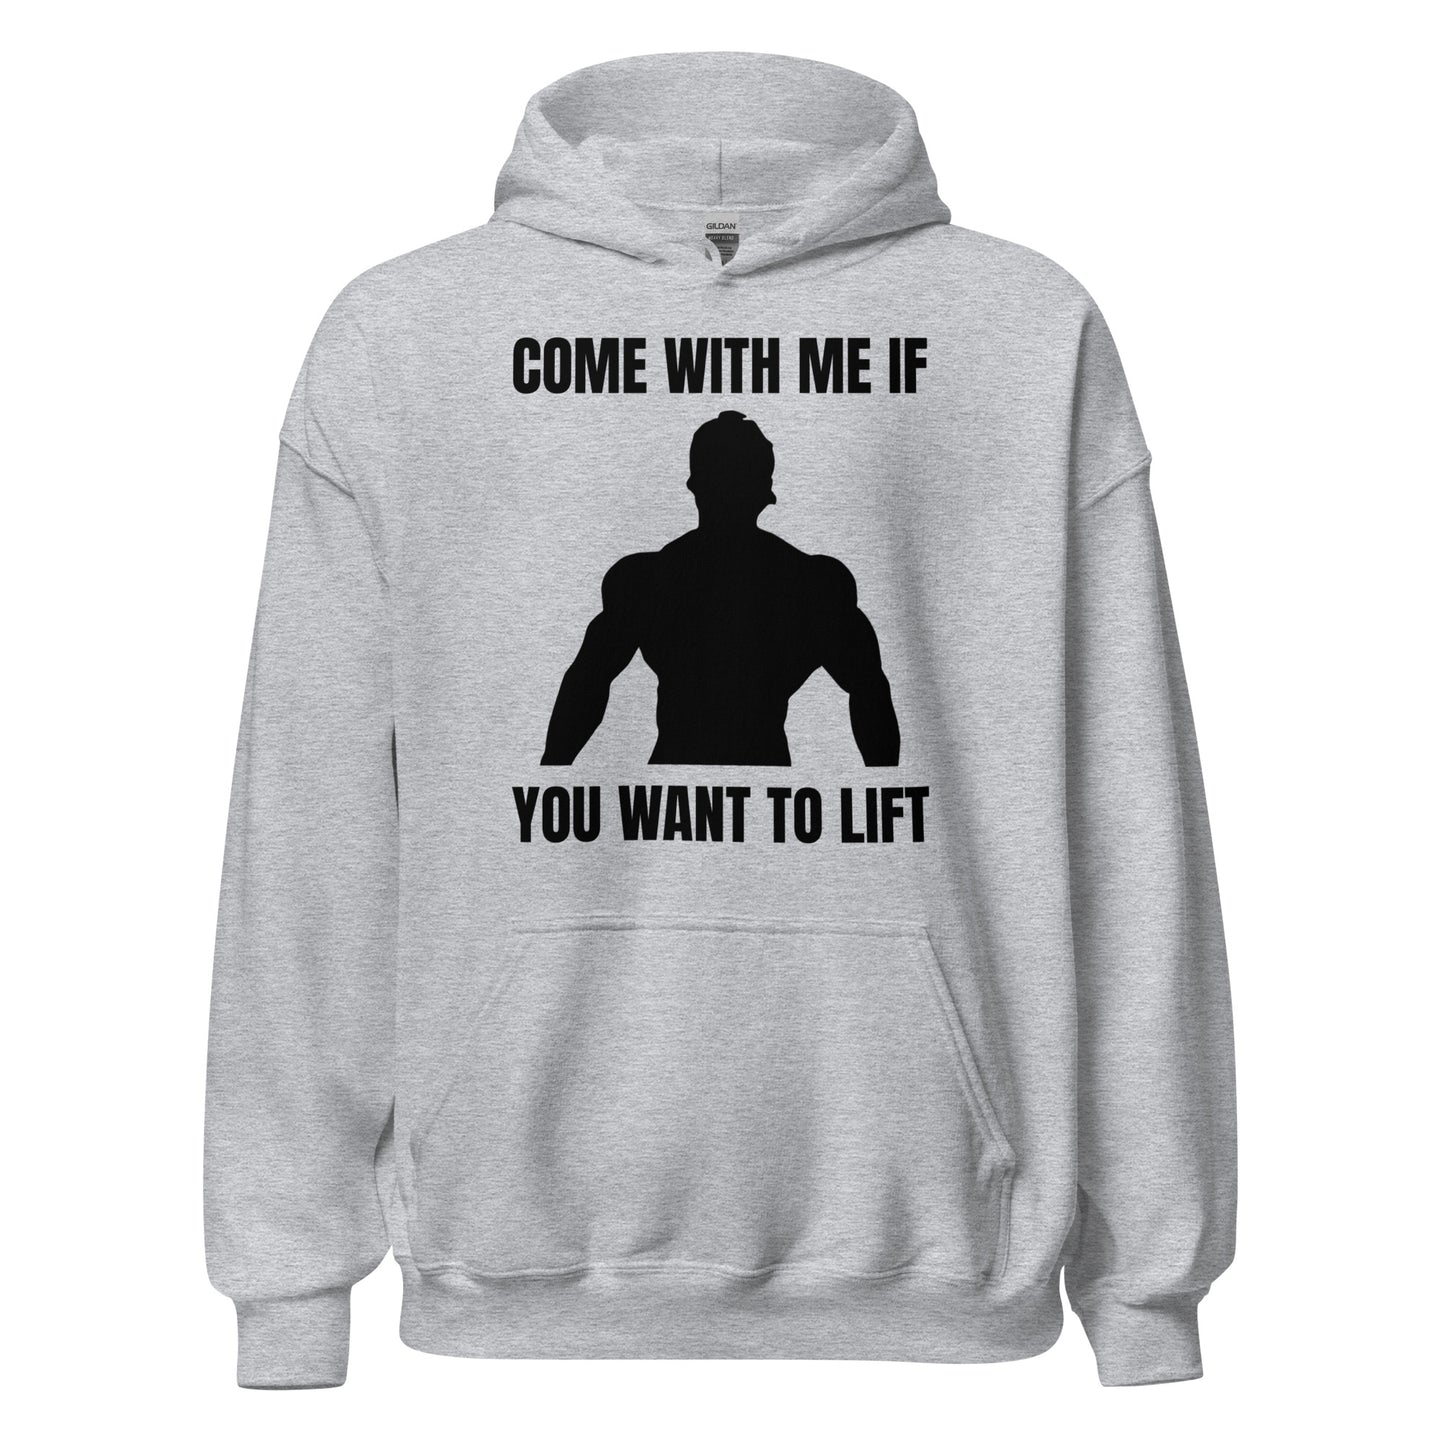 Come with Me if You Want to Lift Hoodie in Sport Grey